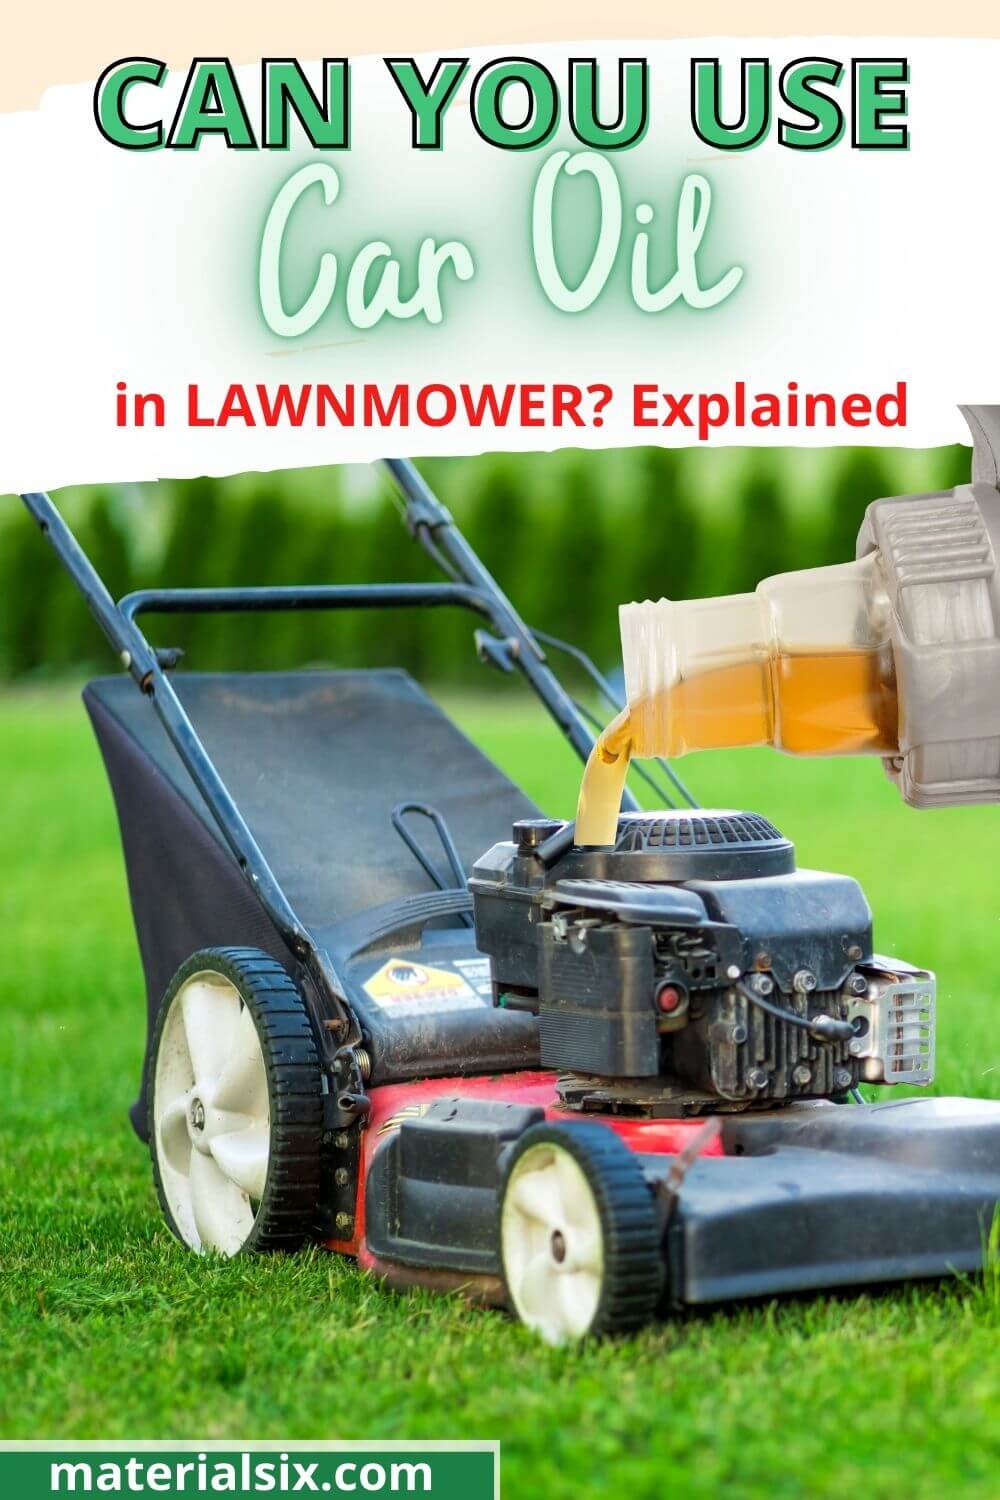 Can You Use Car Oil in Lawn Mower